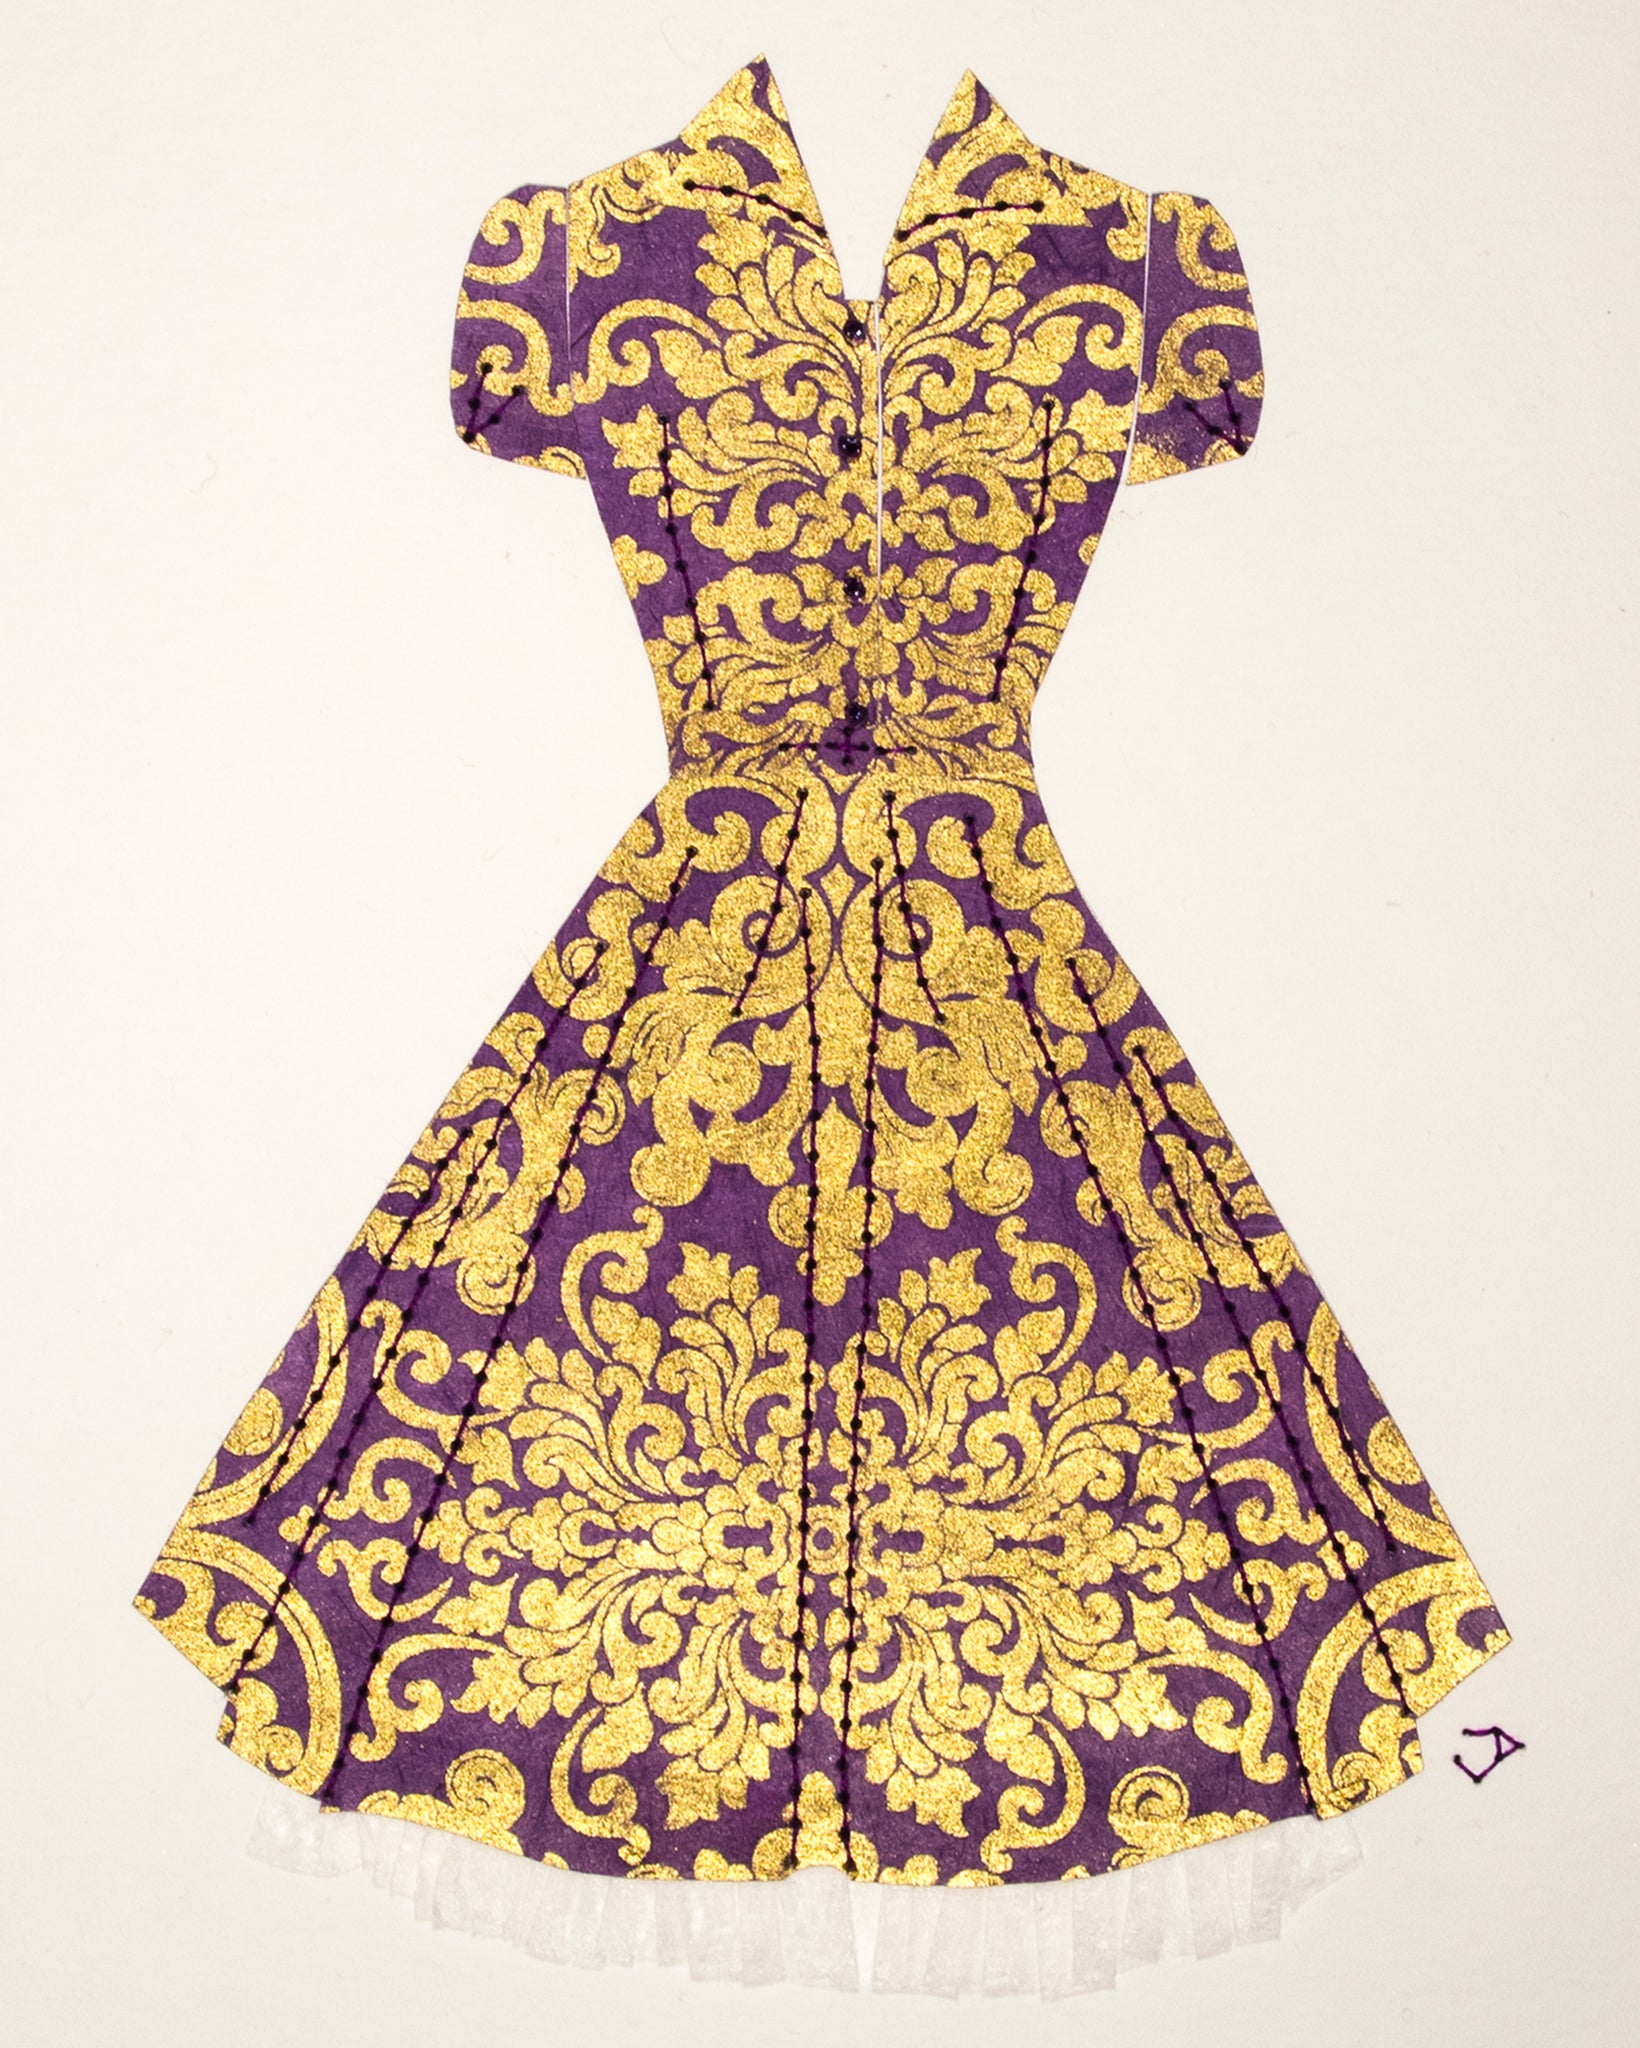 Pinup #004: Pinup dress in purple and gold with crinoline. 2016